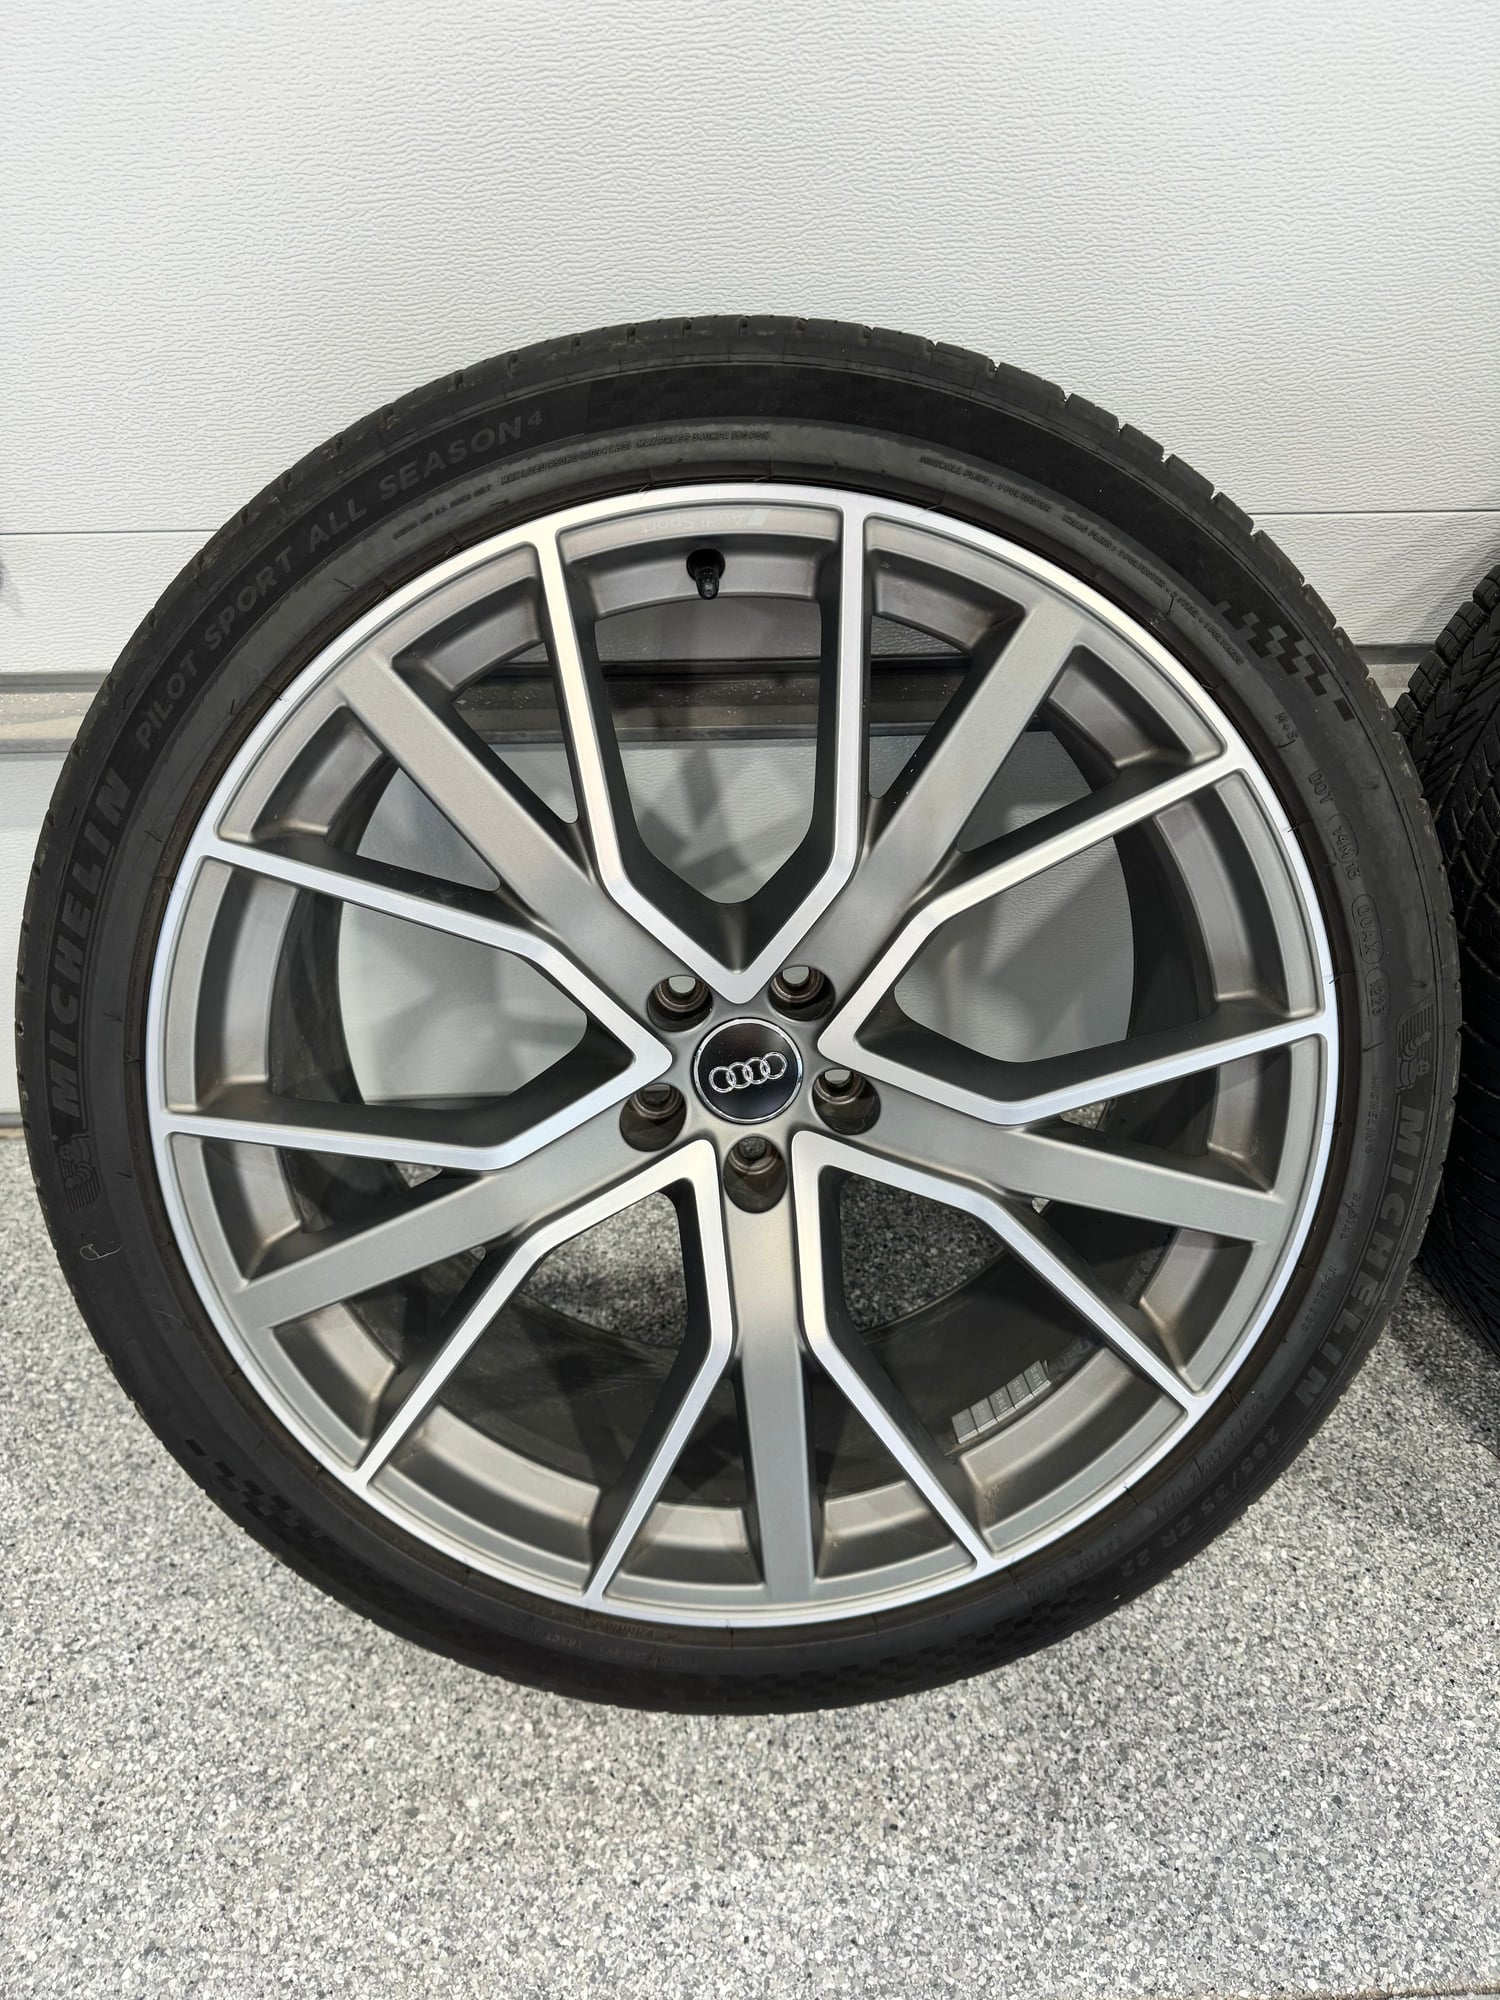 Wheels and Tires/Axles - FS: 22" Audi Sport wheels w/ nearly new MPS AS Tires - Used - 0  All Models - Waukee, IA 50263, United States